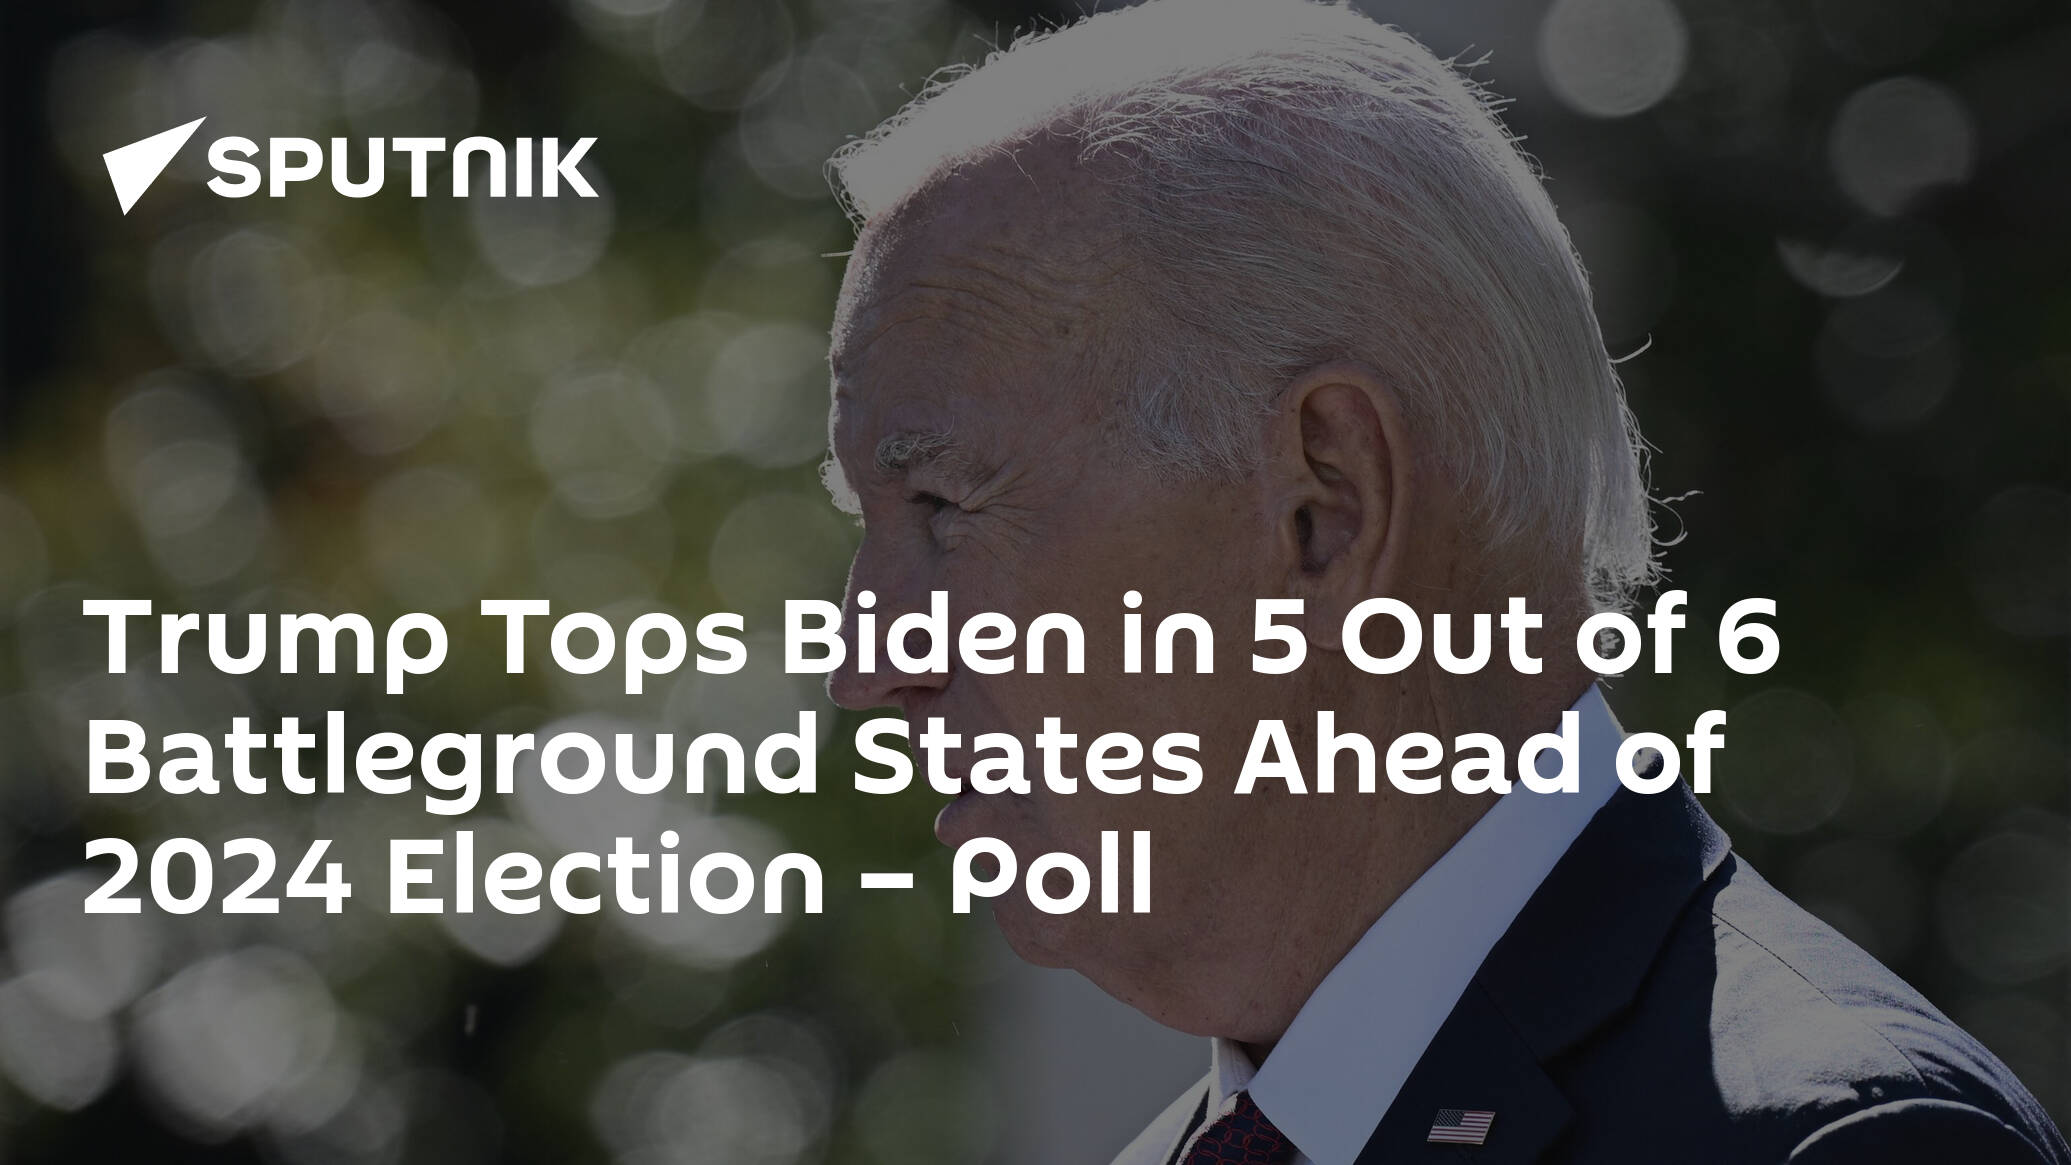 Trump Tops Biden in 5 Out of 6 Battleground States Ahead of 2024 Election – Poll